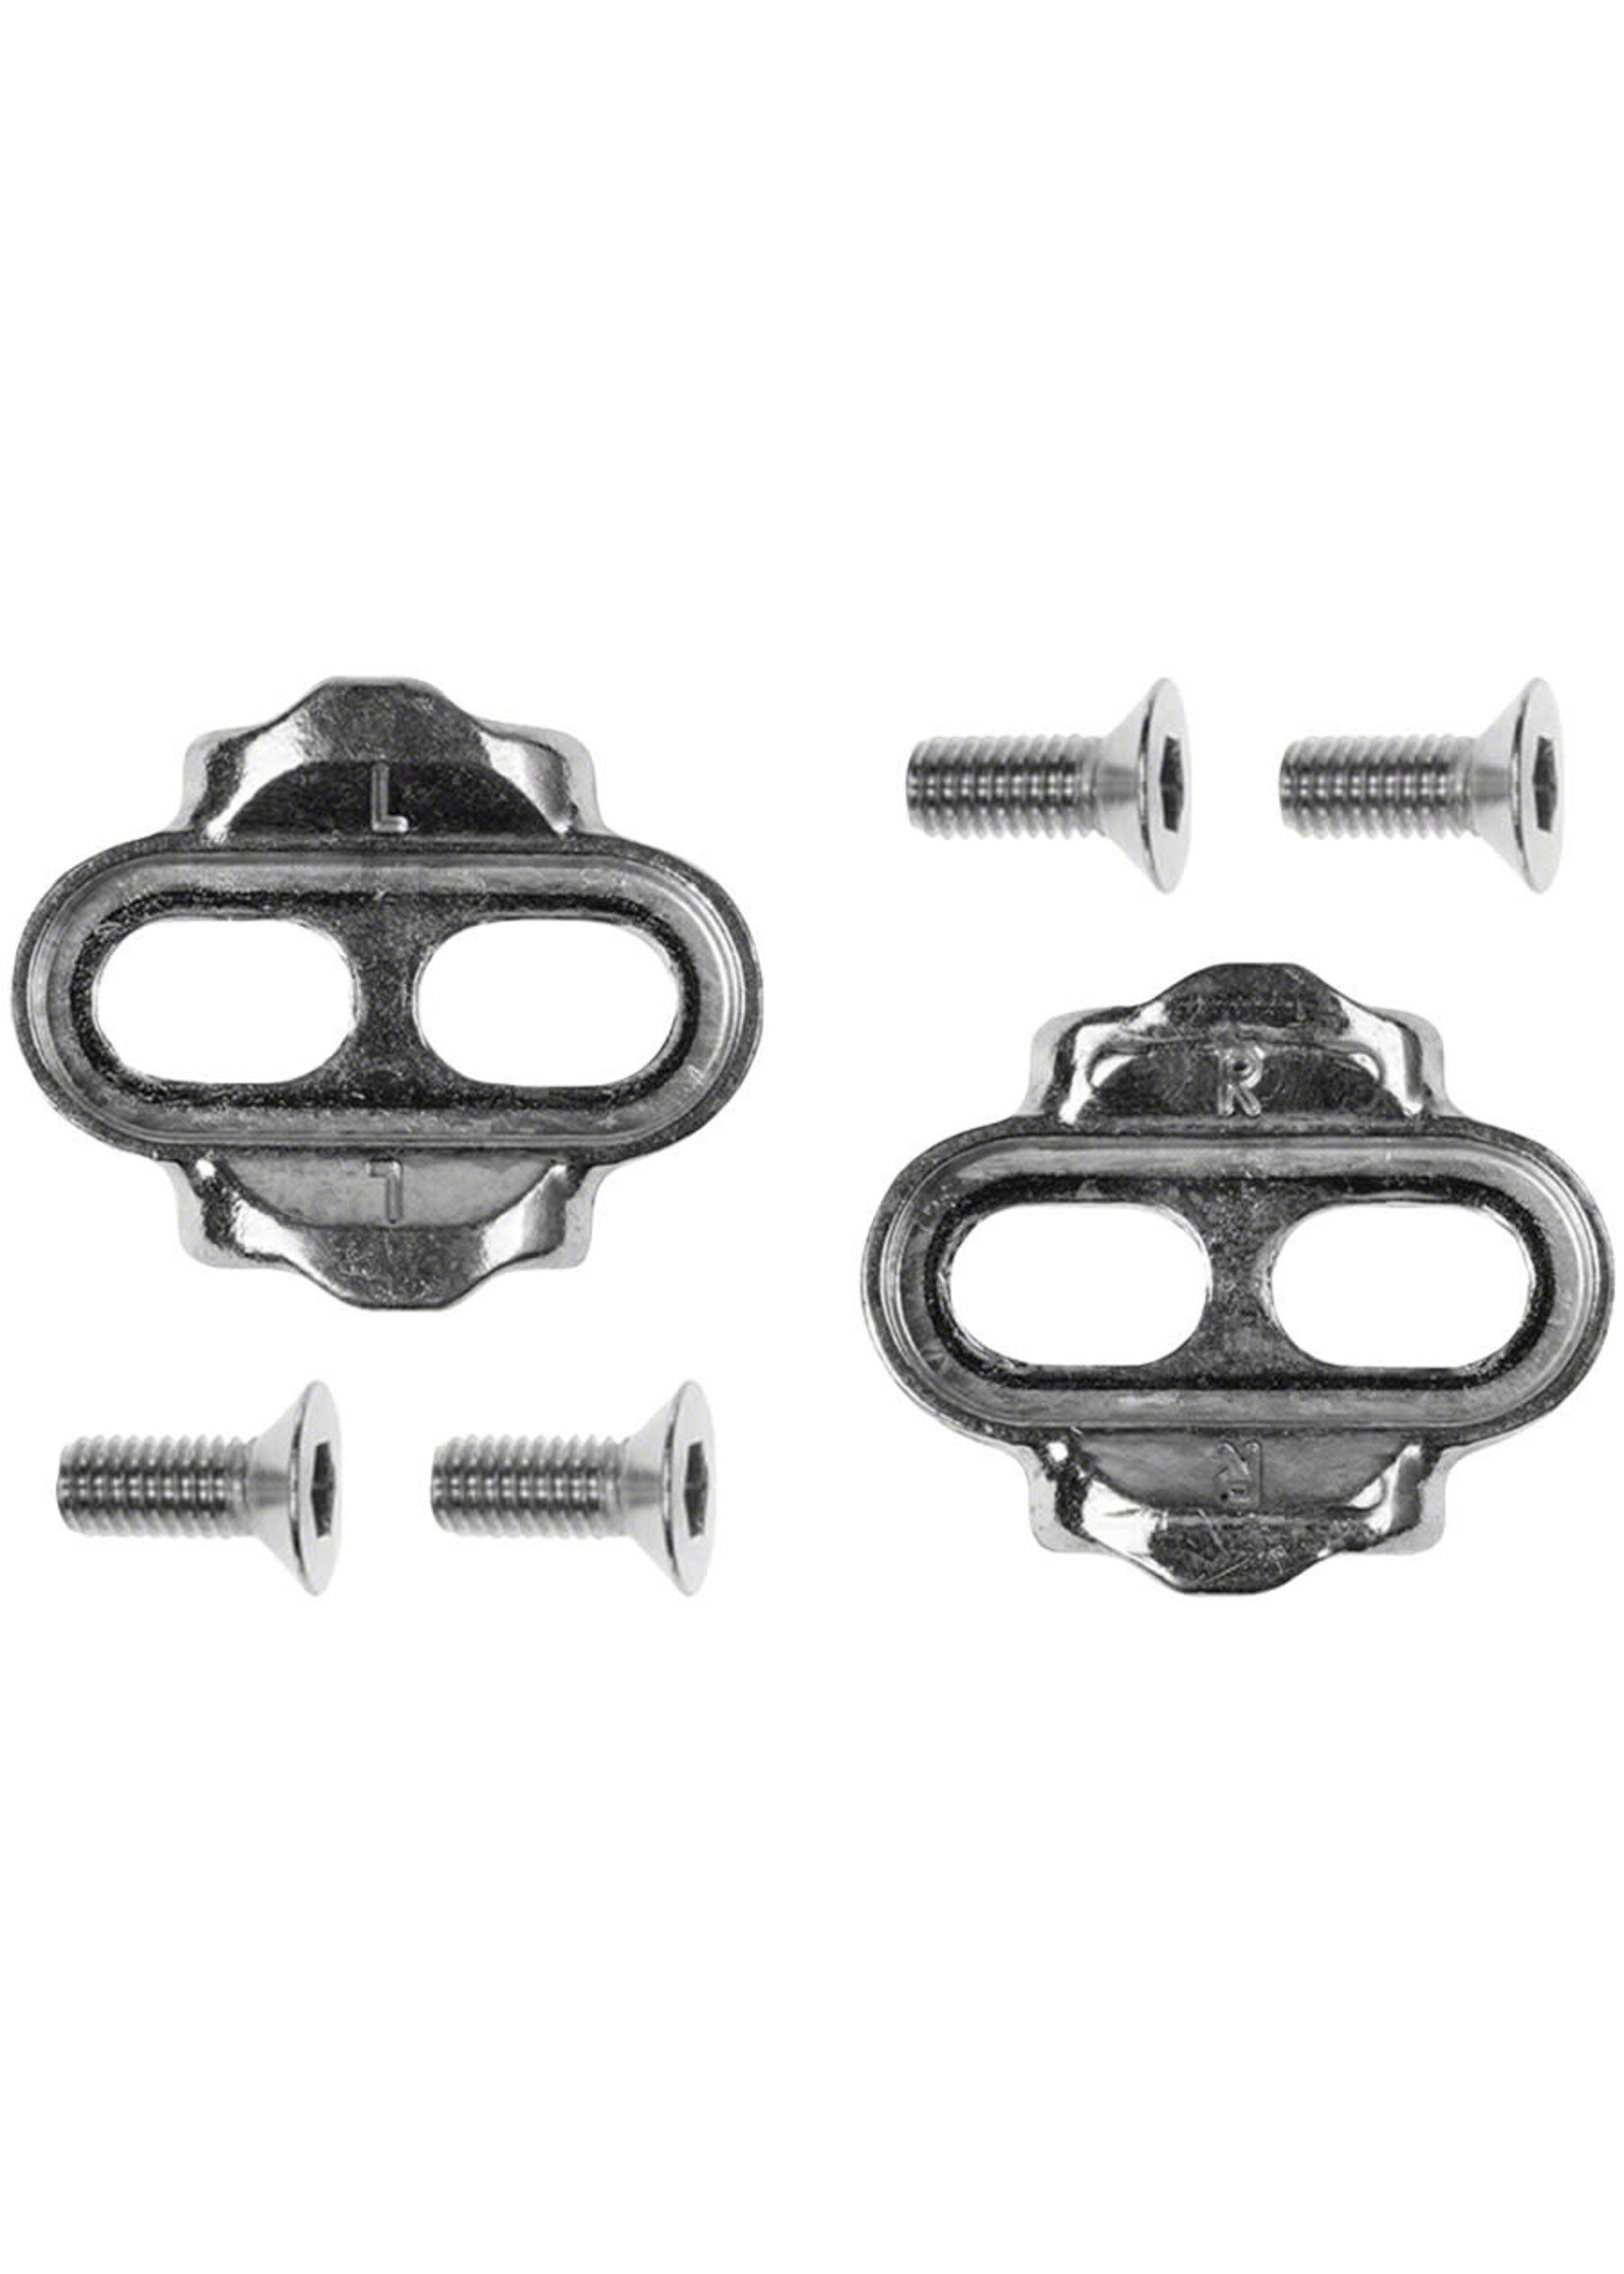 CrankBrothers Crankbrothers Cleats-Standard Release, 0 Float, 15 Release, Silver